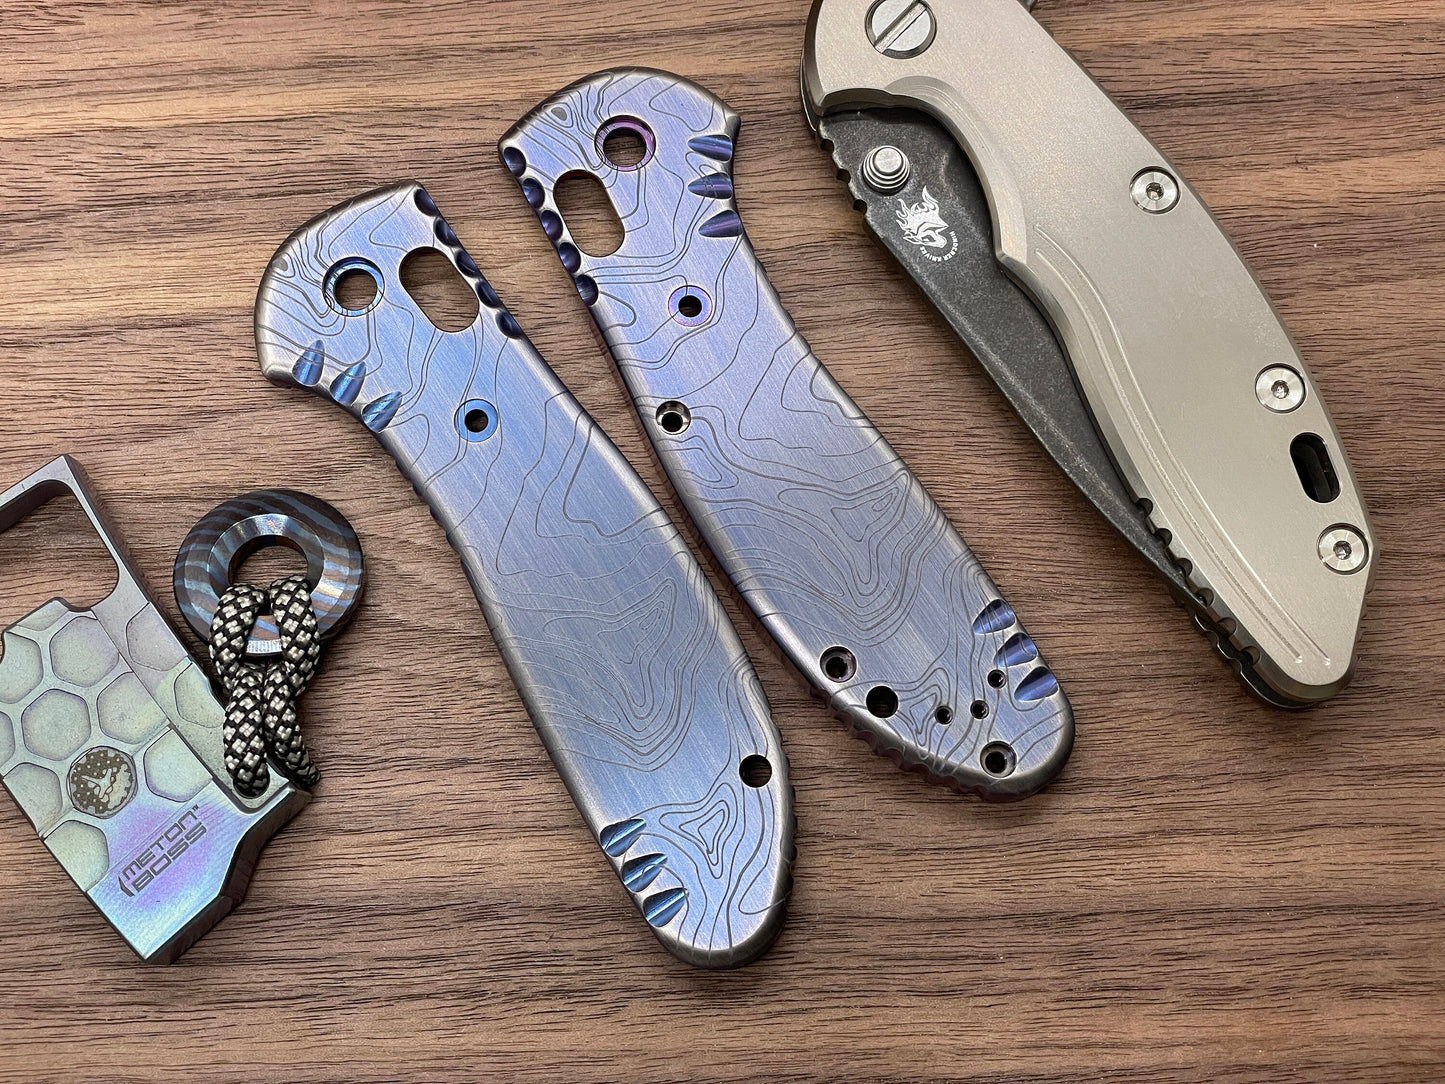 TOPO Blue Ano Brushed Titanium Scales for Benchmade GRIPTILIAN 551 & 550